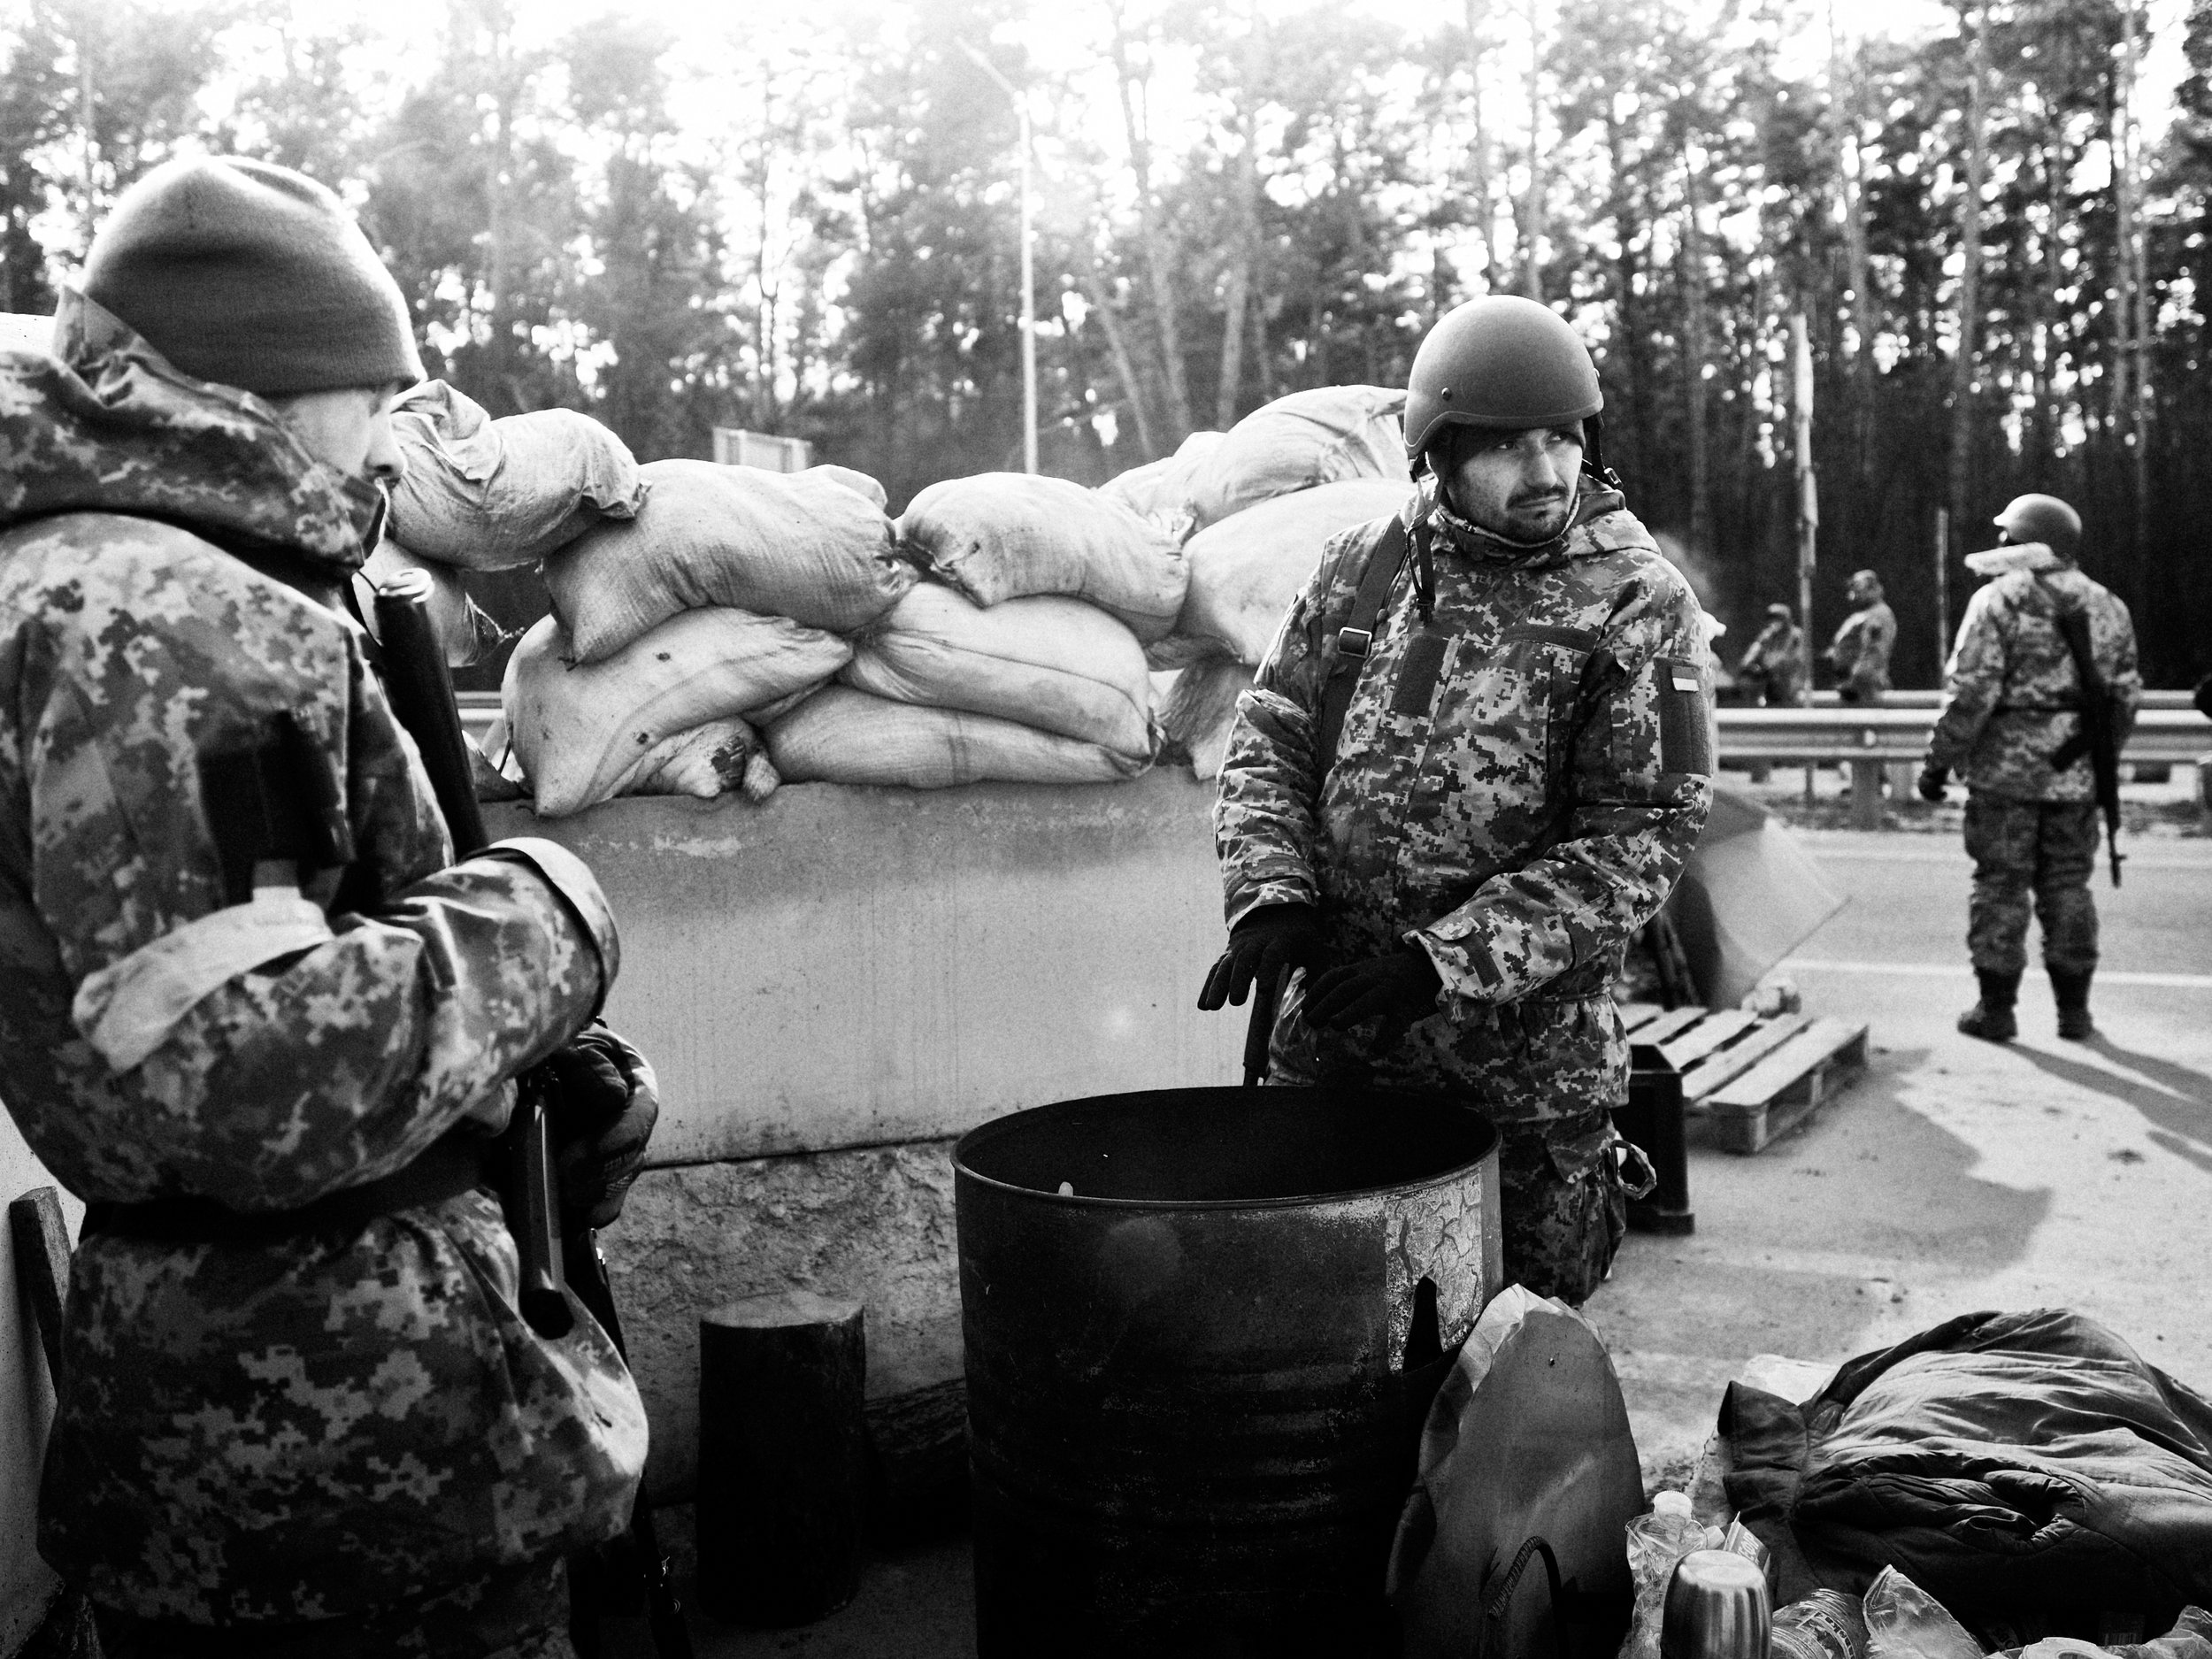 Territorial Defense soldiers at a checkpoint, Kyiv Oblast